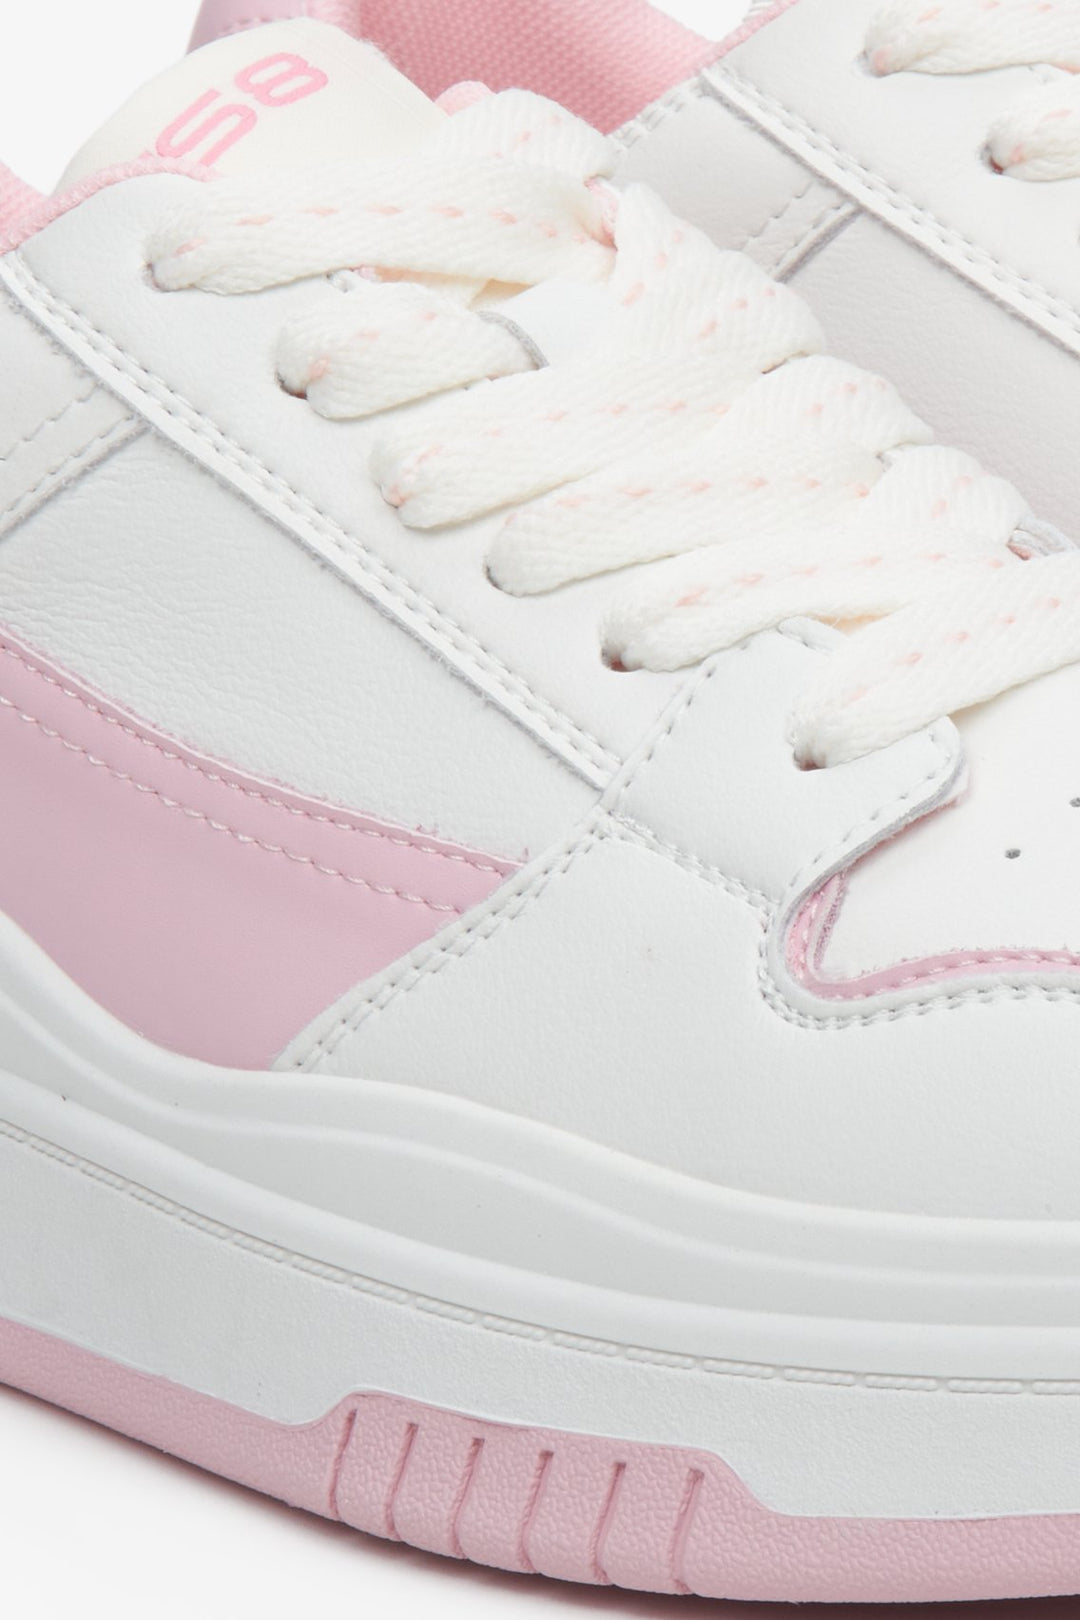 Sophisticated women's white and pink leather sneakers  - close-up on details.